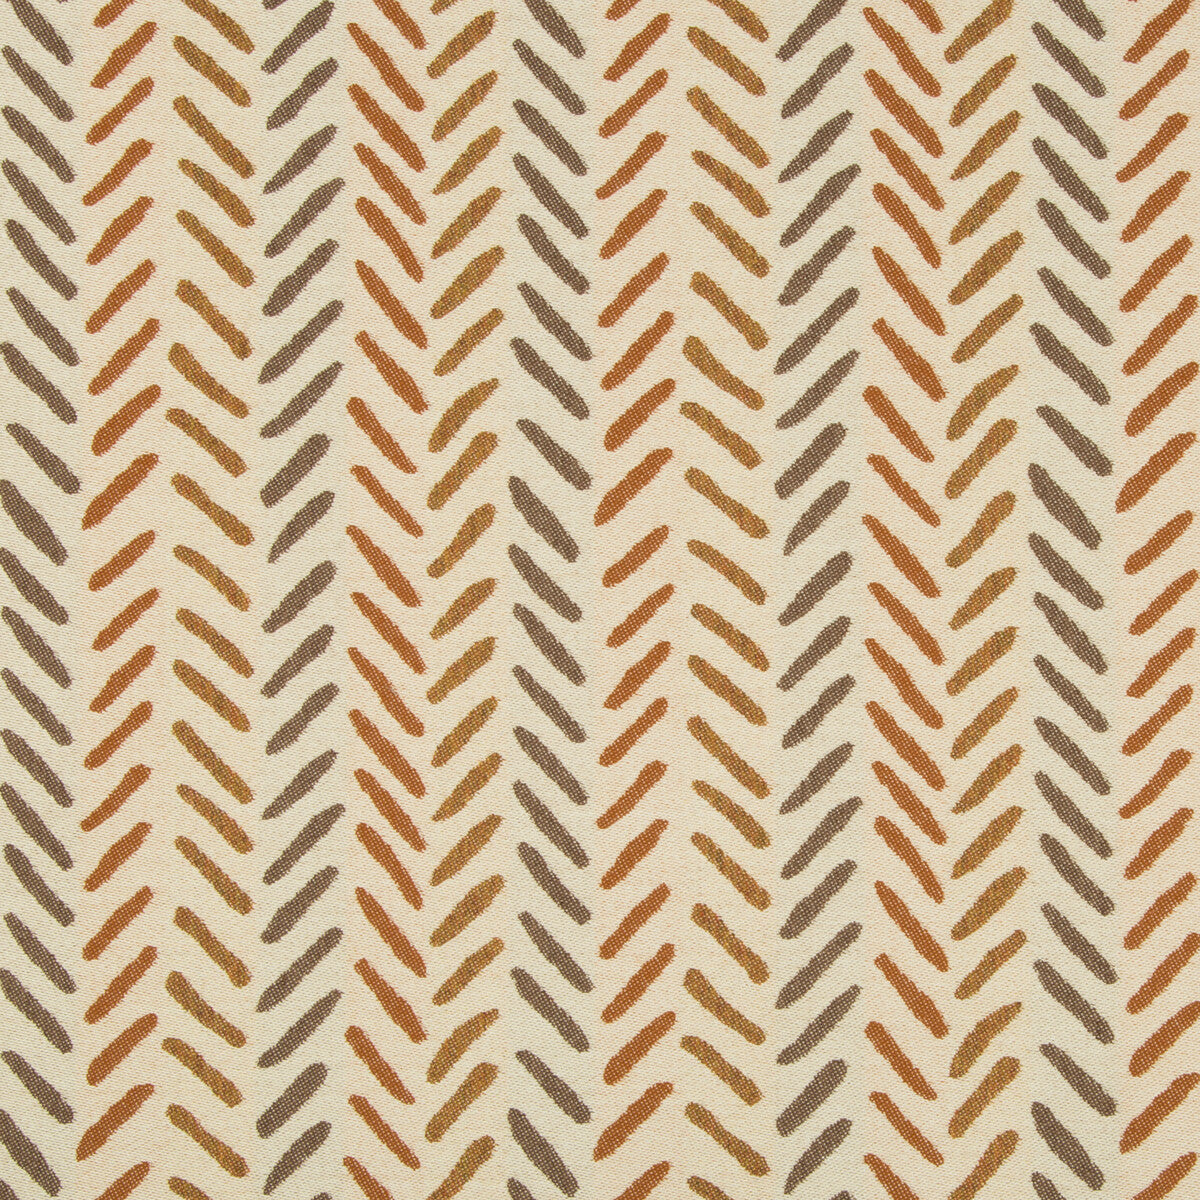 Sands Of Time fabric in earth color - pattern 31949.1624.0 - by Kravet Design in the Oceania Indoor Outdoor collection